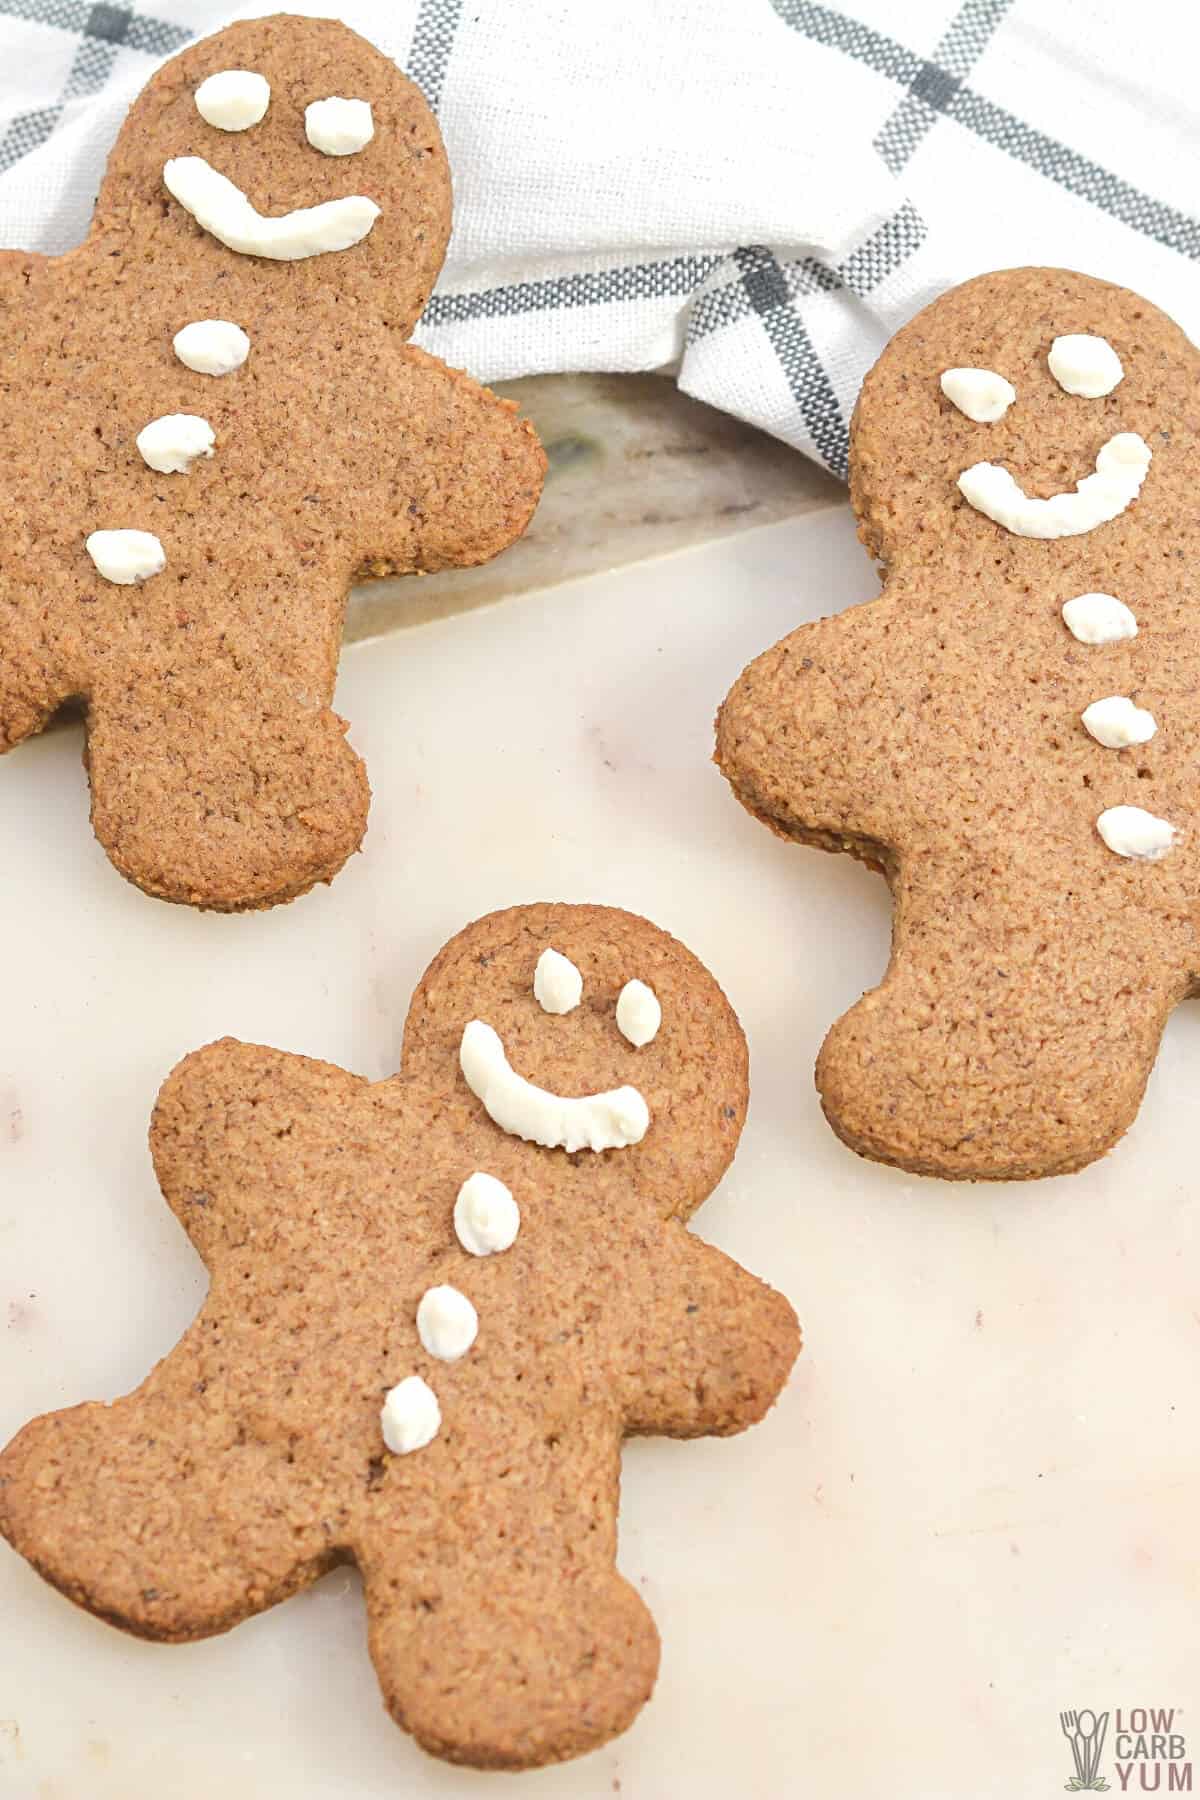 keto gingerbread cookies on white cutting board with plaid kitchen towel